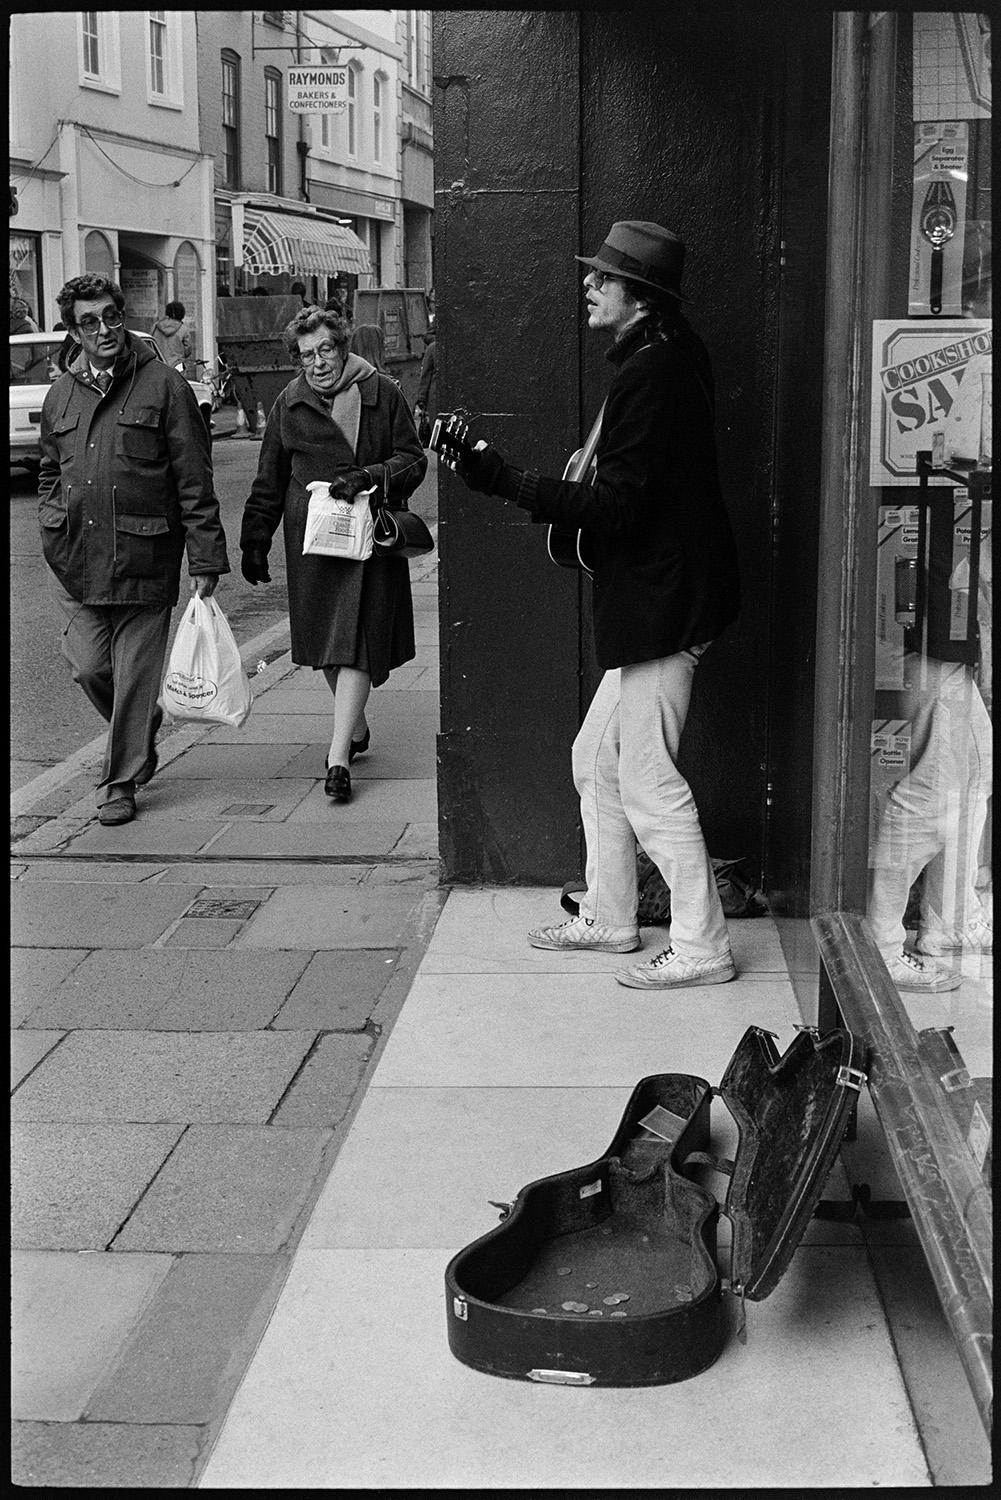 Man busking with a guitar outside a shop on the High Street in Barnstaple. A man and a woman are walking past, carrying shopping. The guitar case is open to collect donations. Raymonds bakery shop is visible in the background.